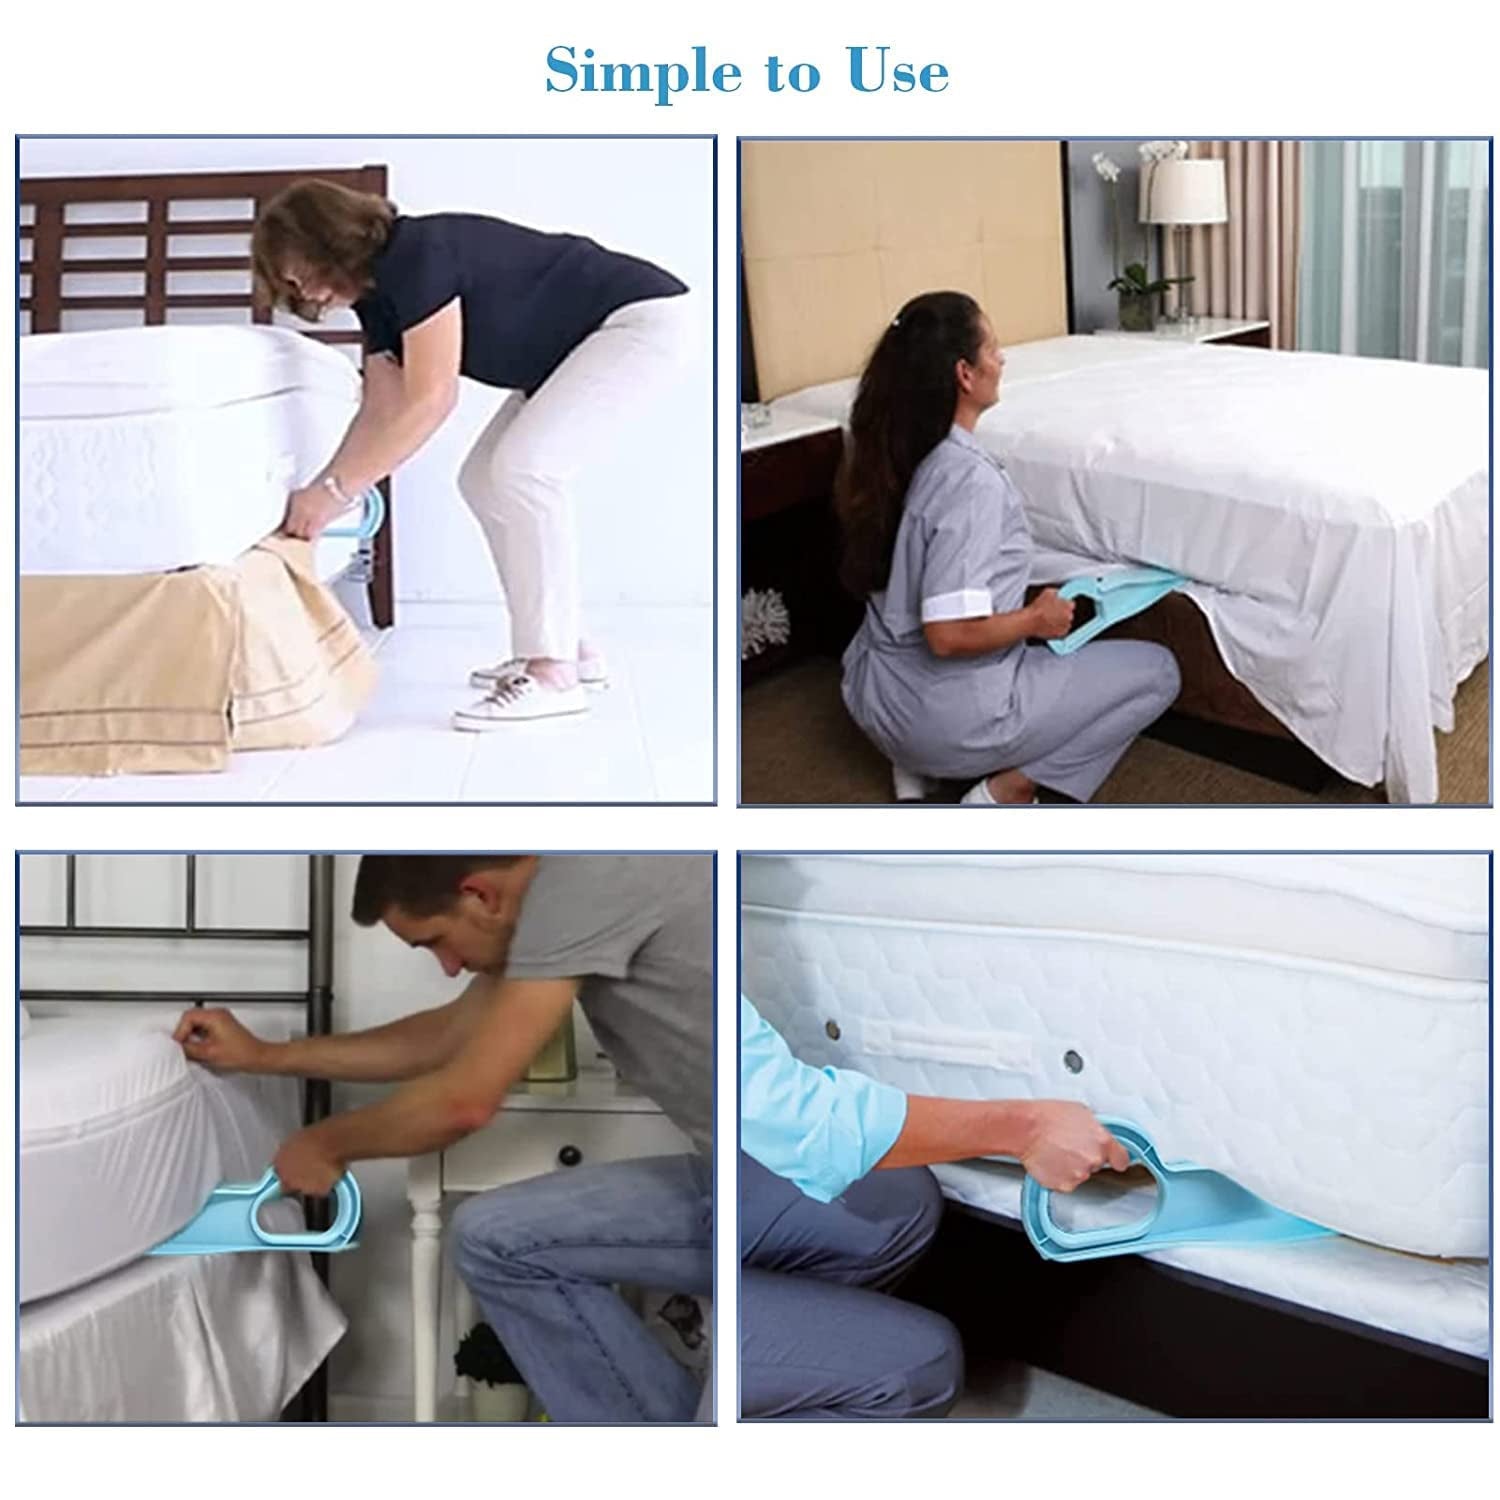 9013 Mattress Lifter Bed Making & Change Bed Sheets Instantly helping Tool ( 1 pc ) DeoDap